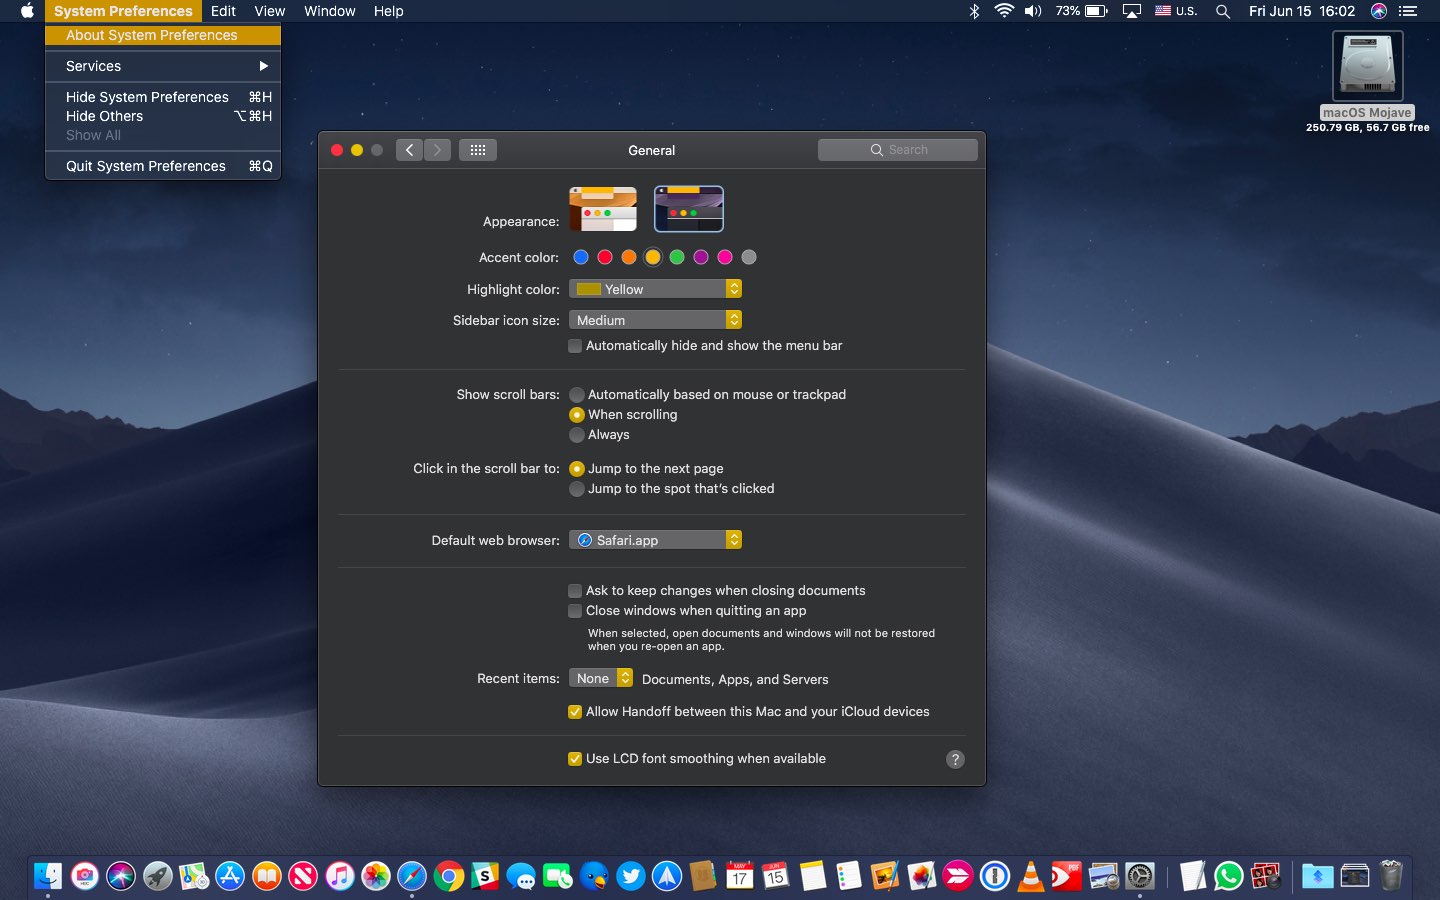 macOS Mojave Dark Mode with the yellow accent and highlight color